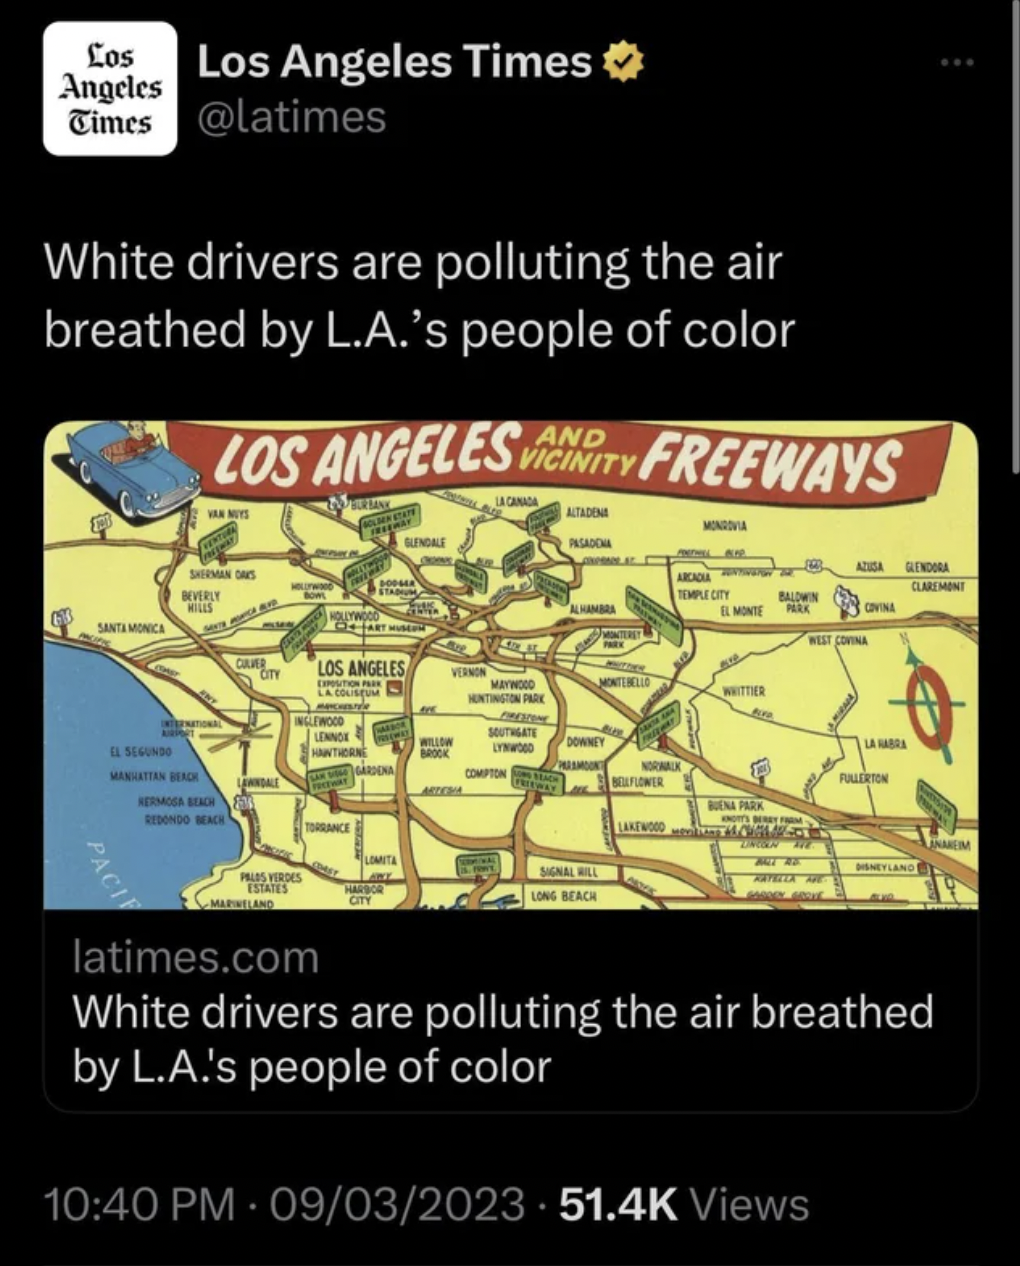 Dumb pics - map - Los Los Angeles Times Angeles Times White drivers are polluting the air breathed by L.A.'s people of color Paci w And Los Angeles Vicinity Freeways Atom www M wid Cany Los Angeles Ma Beach Ma Beng Fara Co Thoseck A 09032023 Views Opin ww